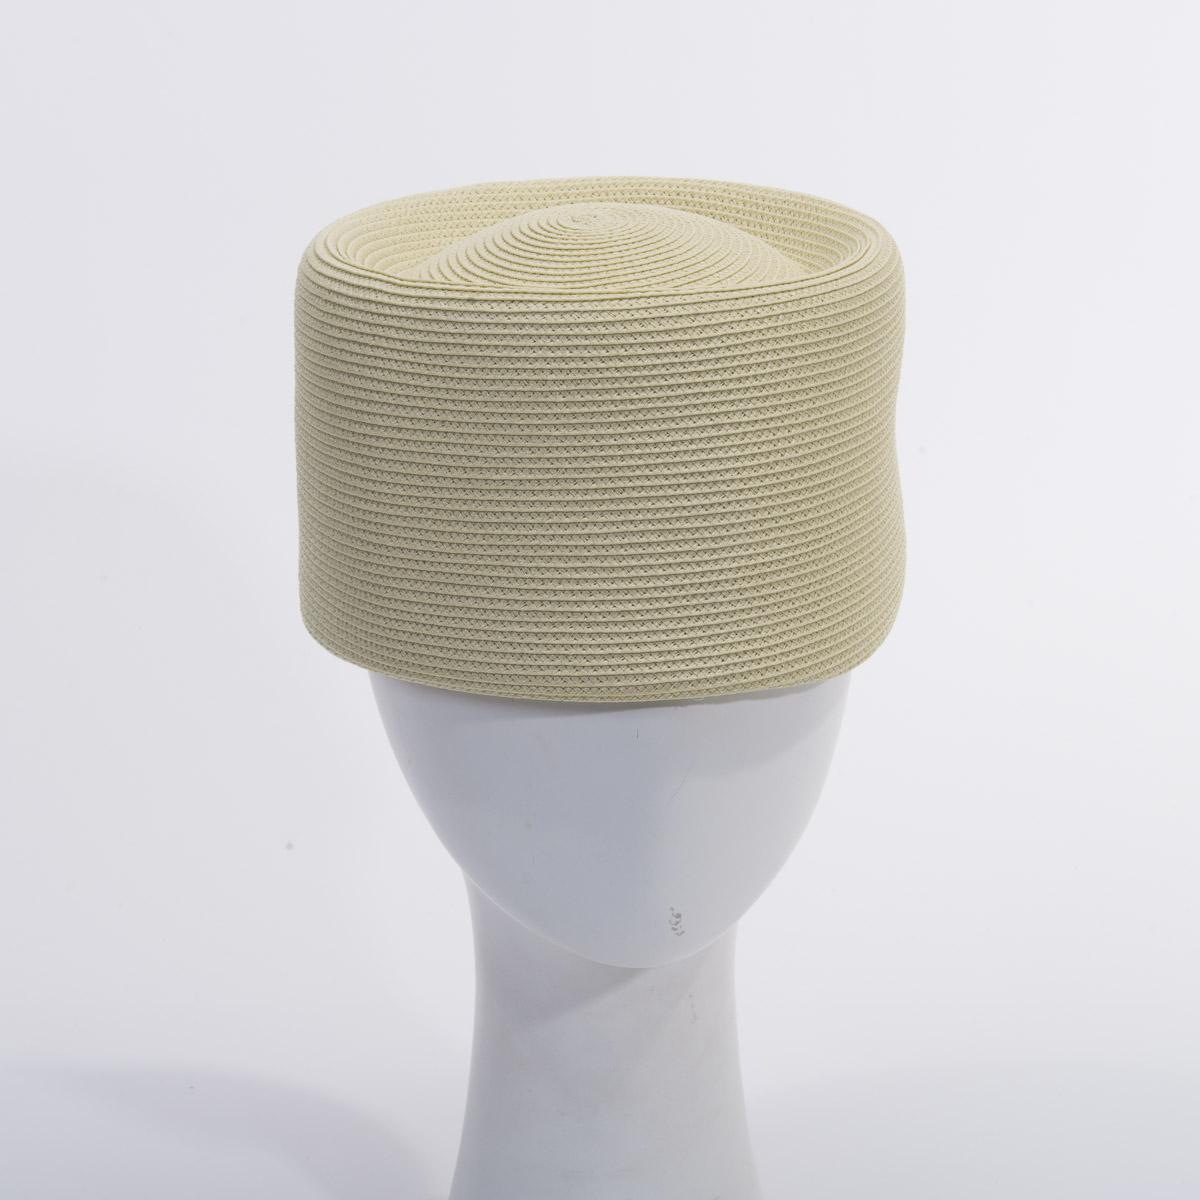 Red Blocked Untrimmed Poly Straw Pillbox Hat Base